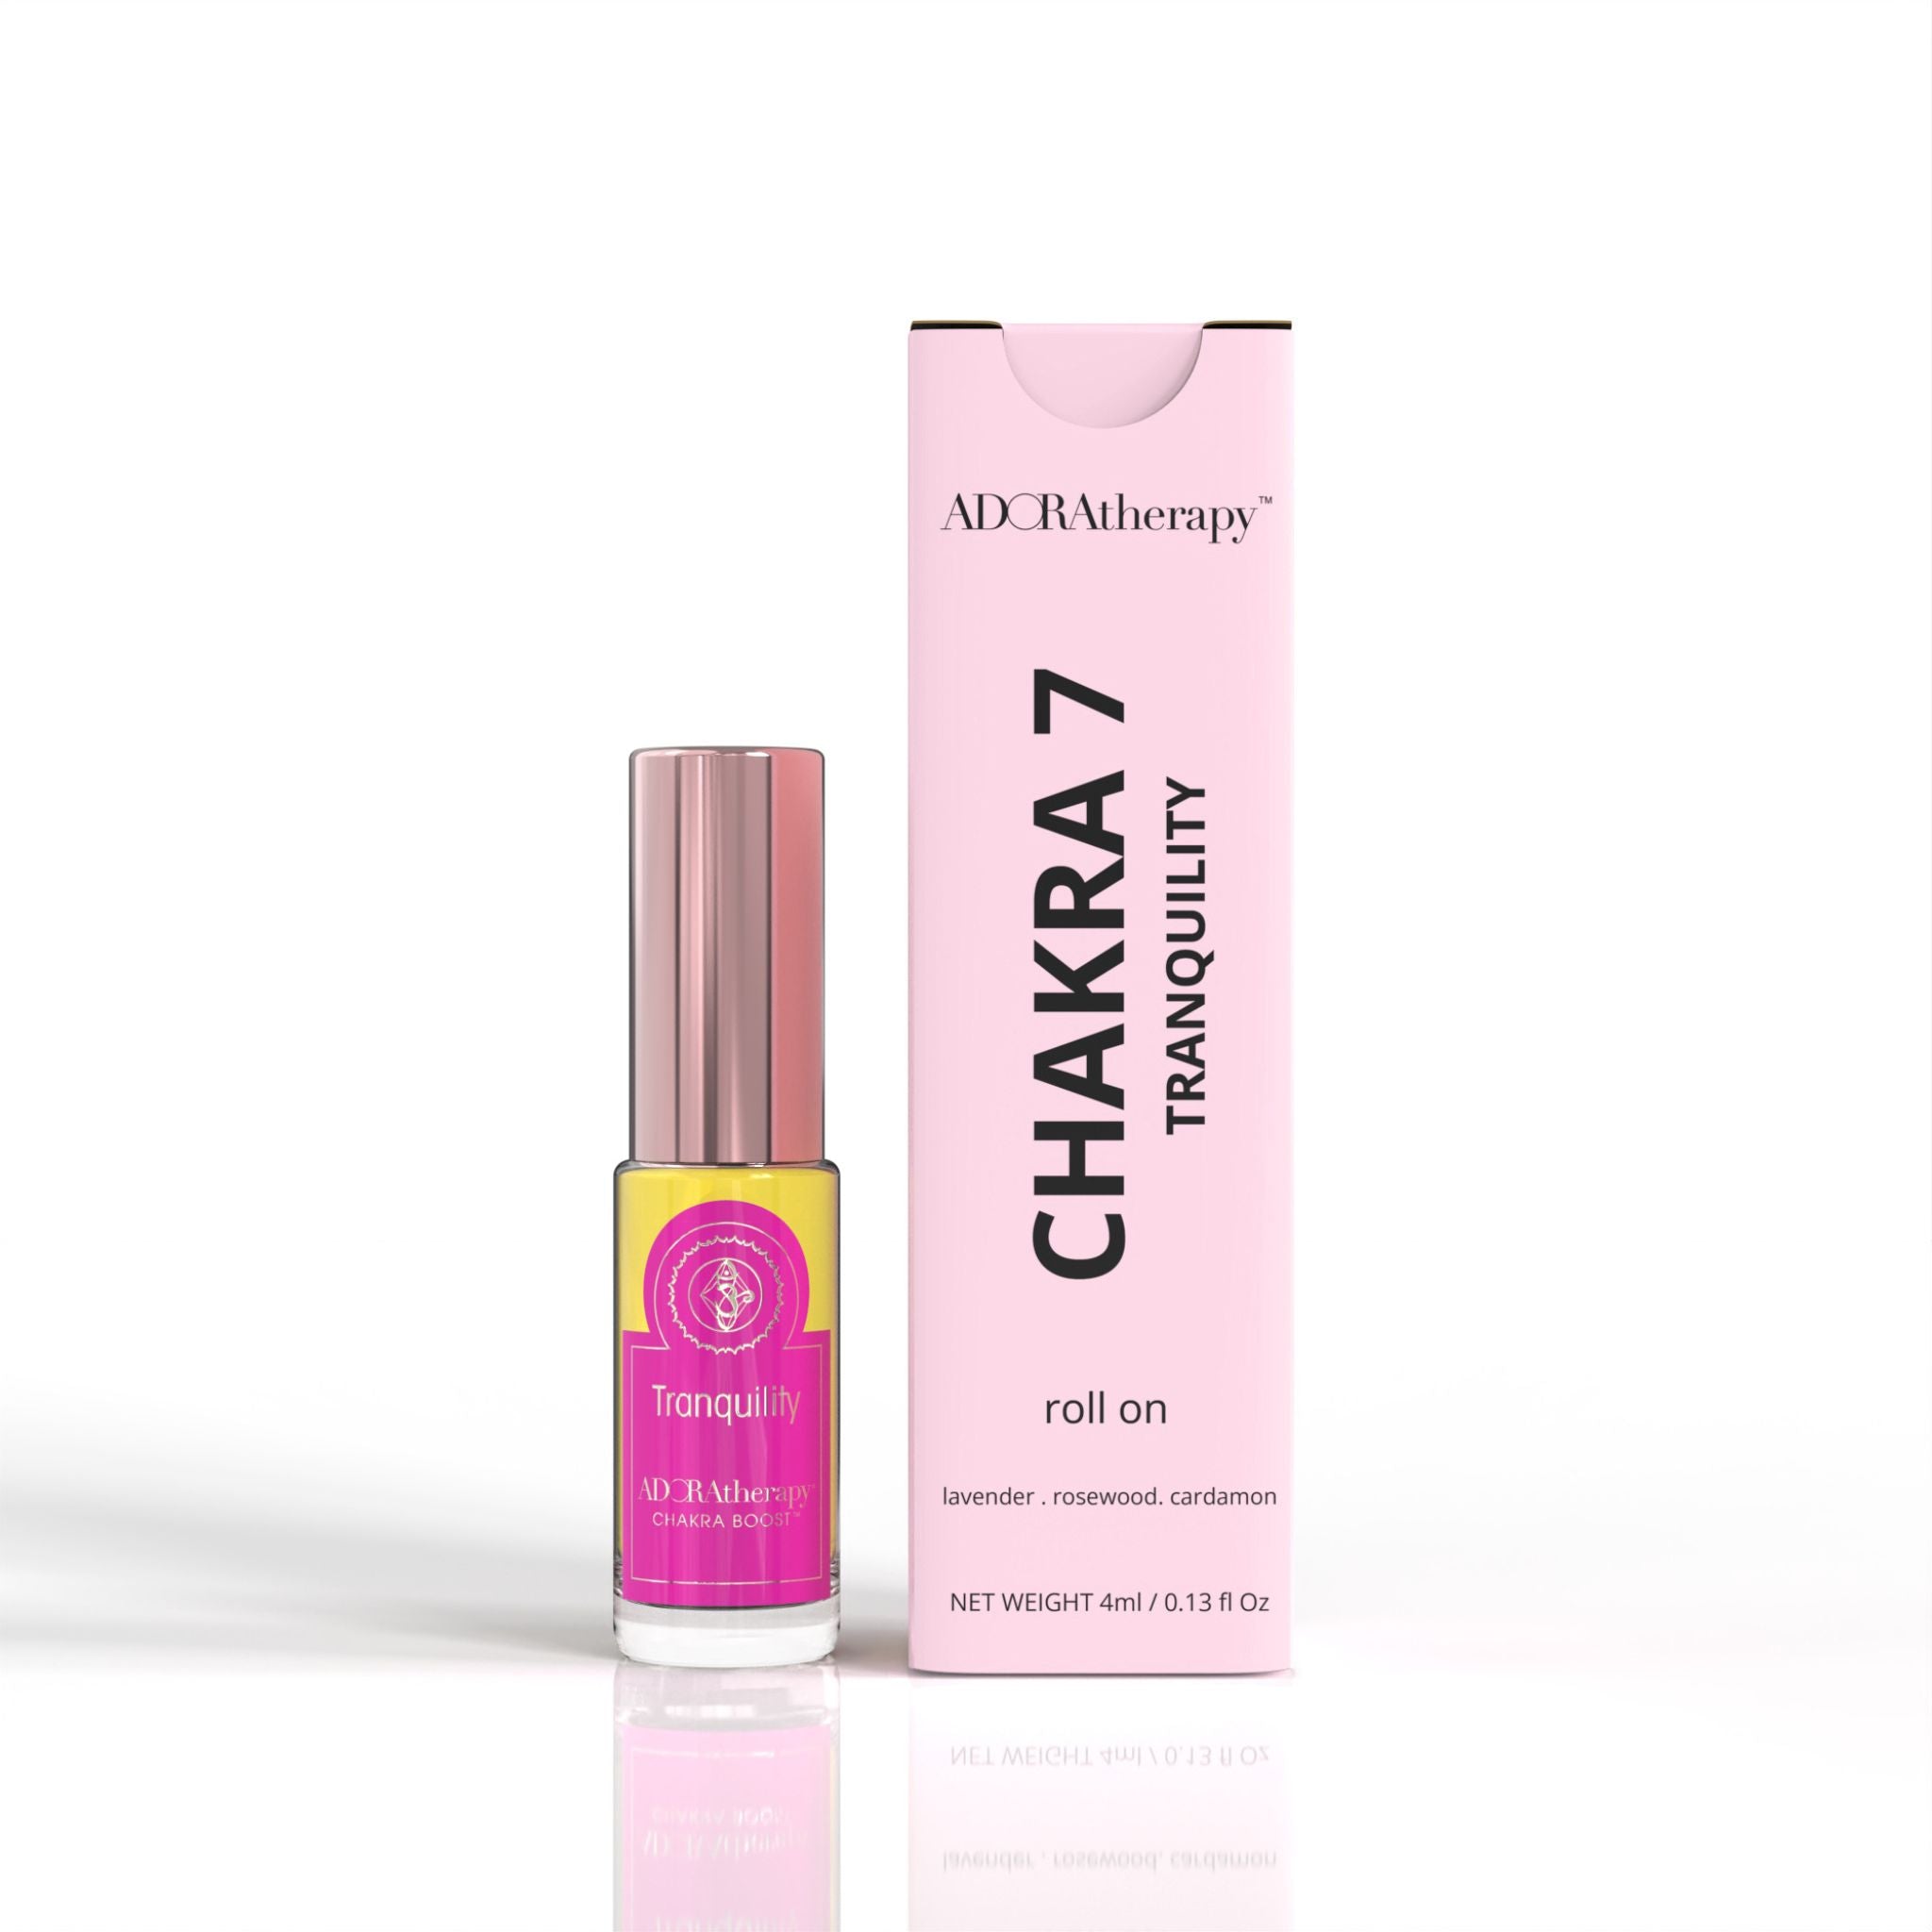 Chakra 7 Tranquility Roll On Perfume Oil by Adoratherapy.com